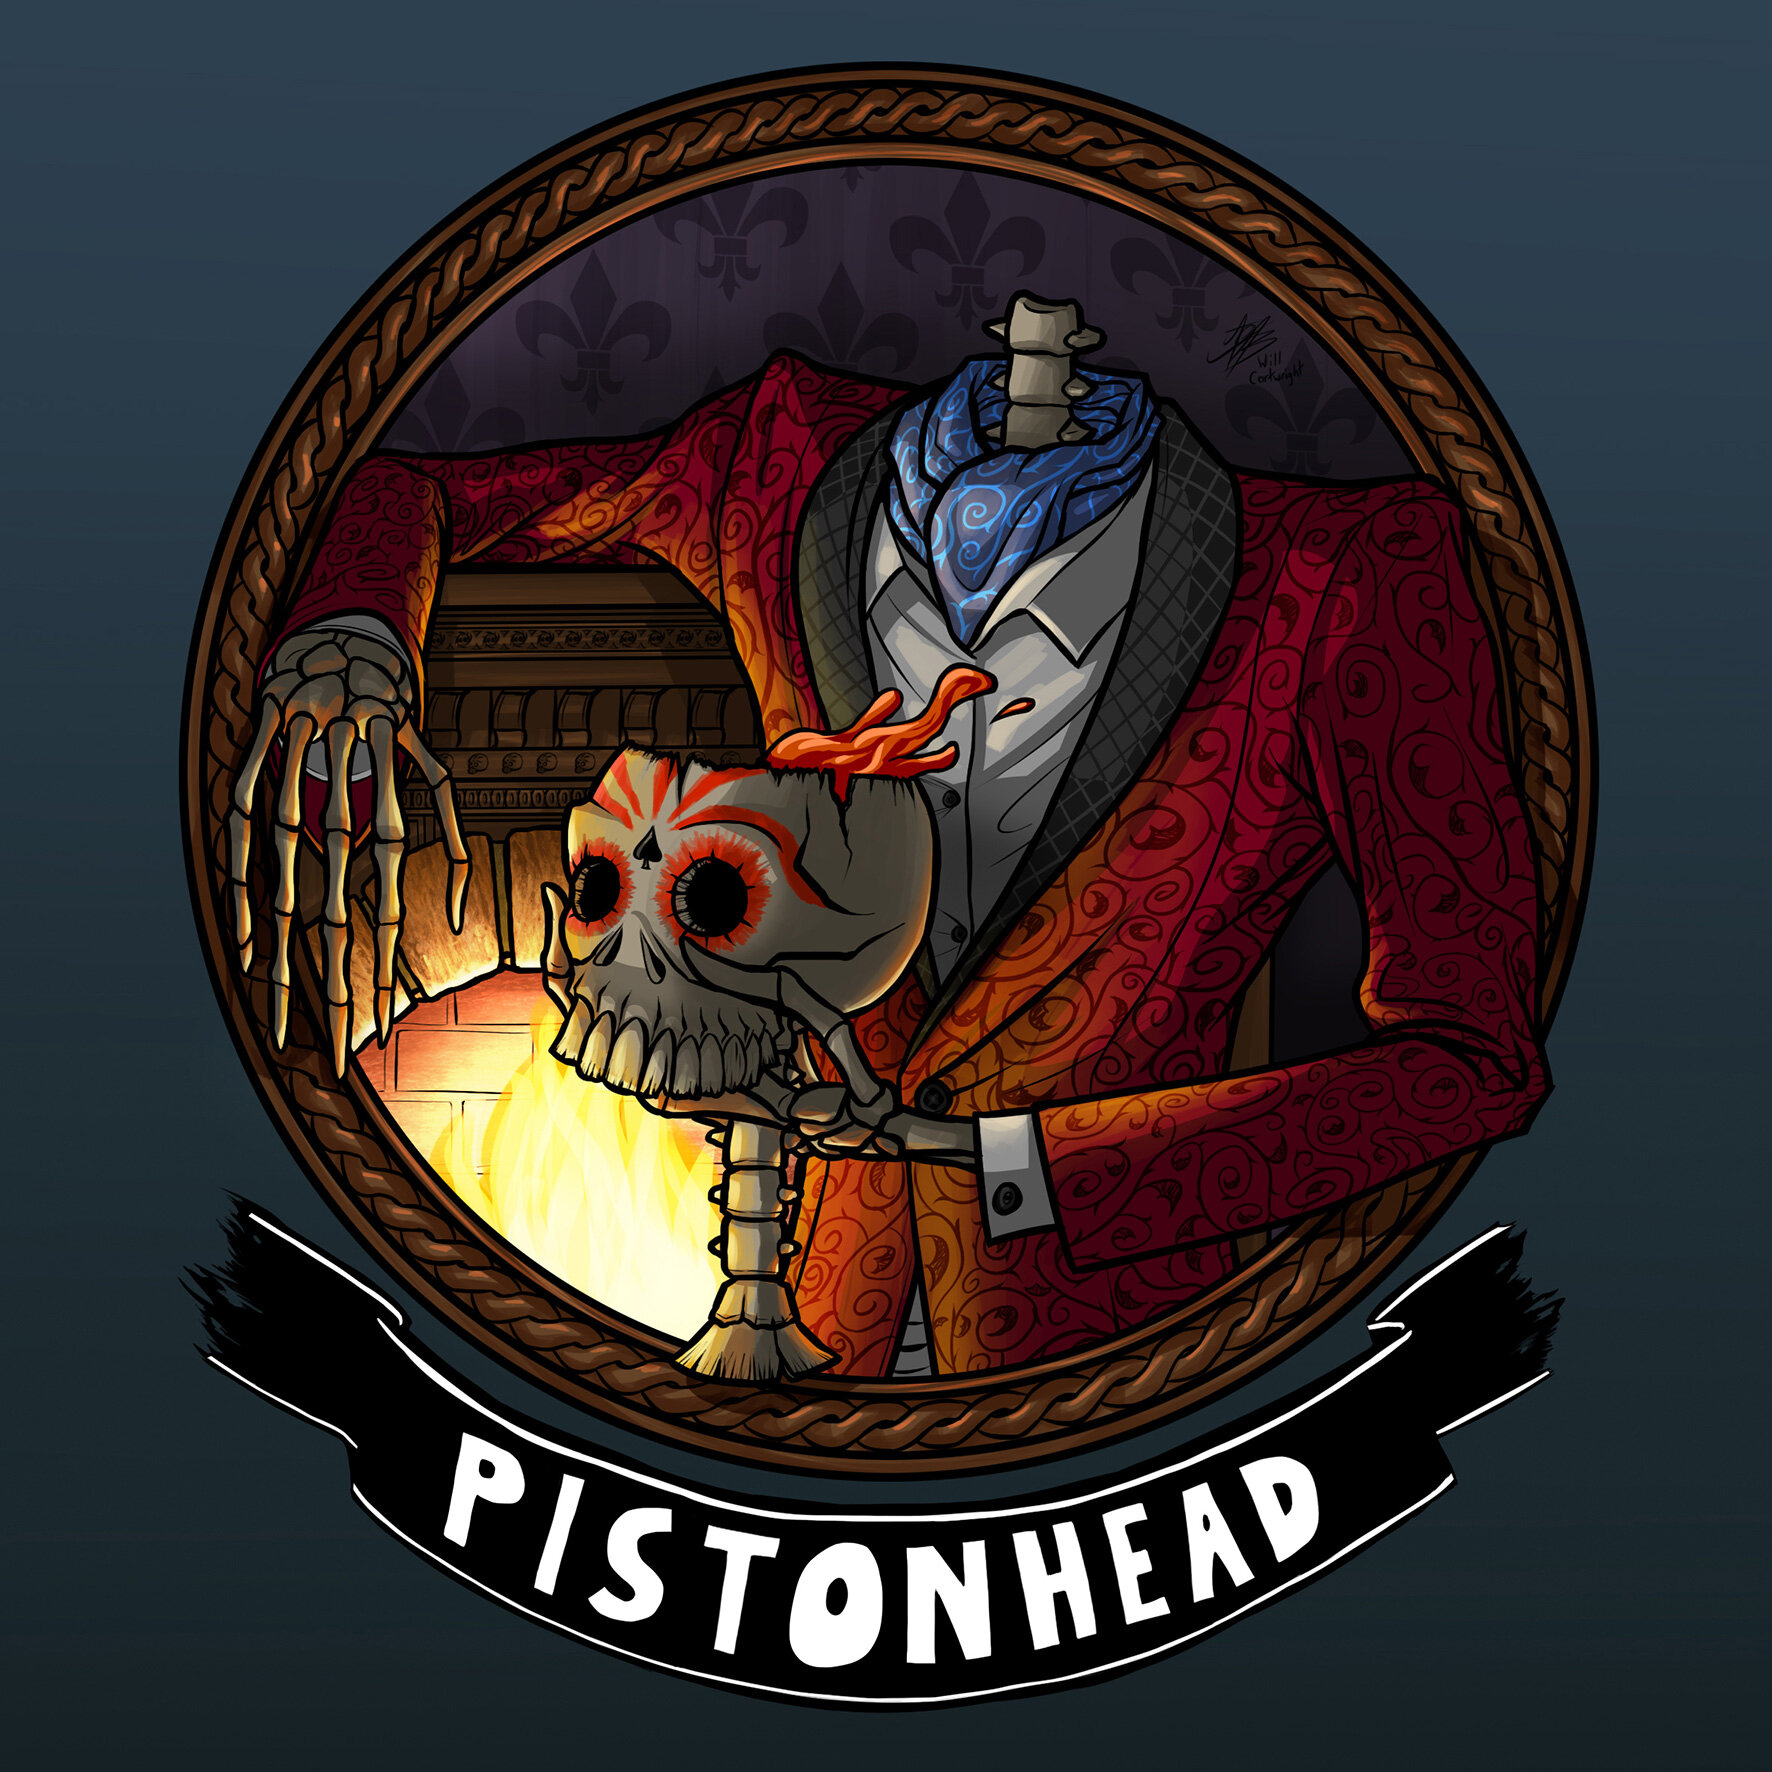 Pistonhead-Competition-Entry-2017.jpg